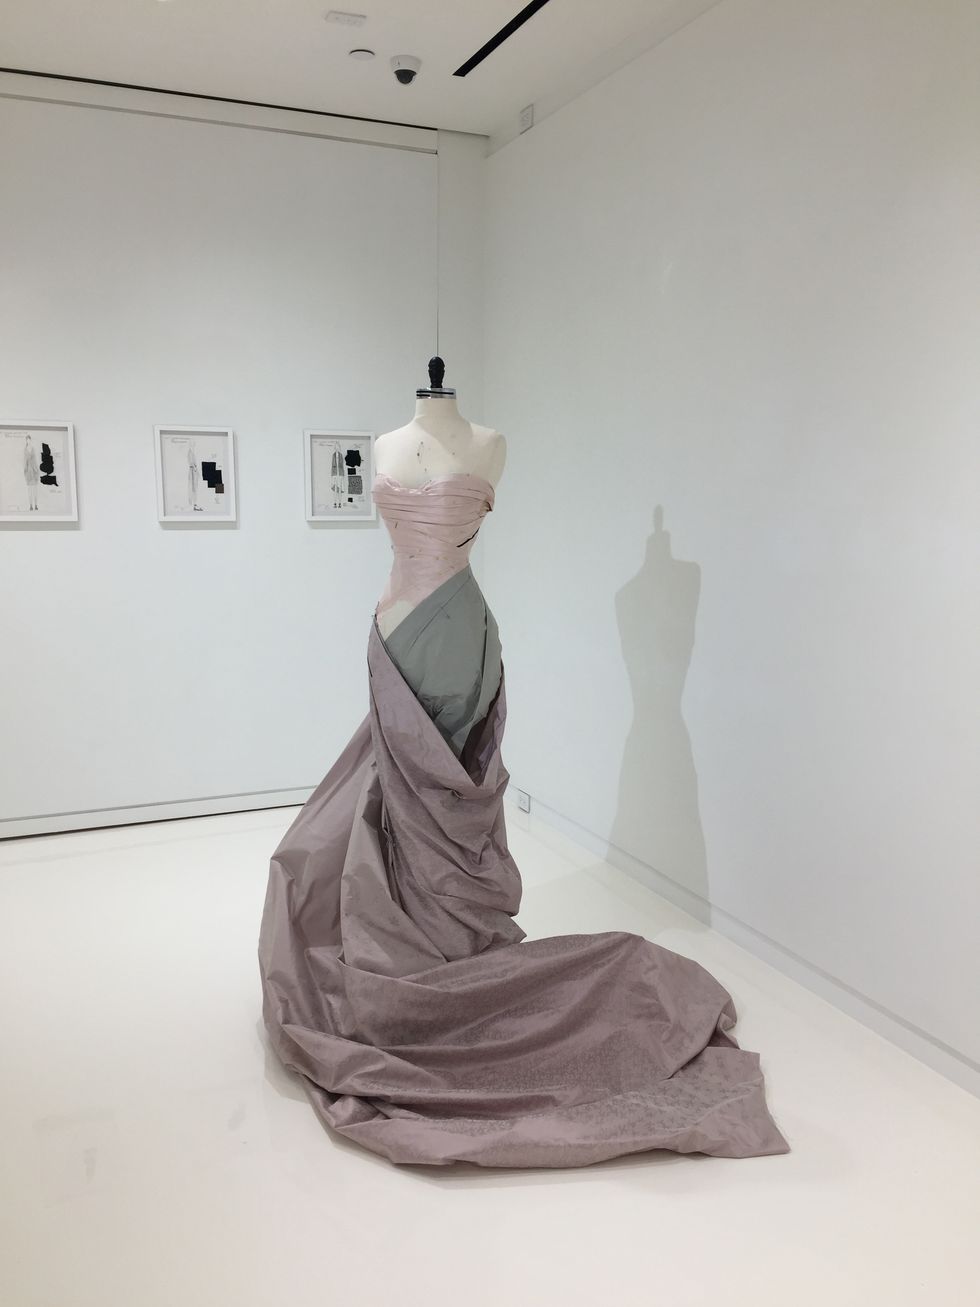 Dress, Sculpture, Fashion, Art, Museum, Tourist attraction, Gown, Stock photography, Room, Ceramic, 